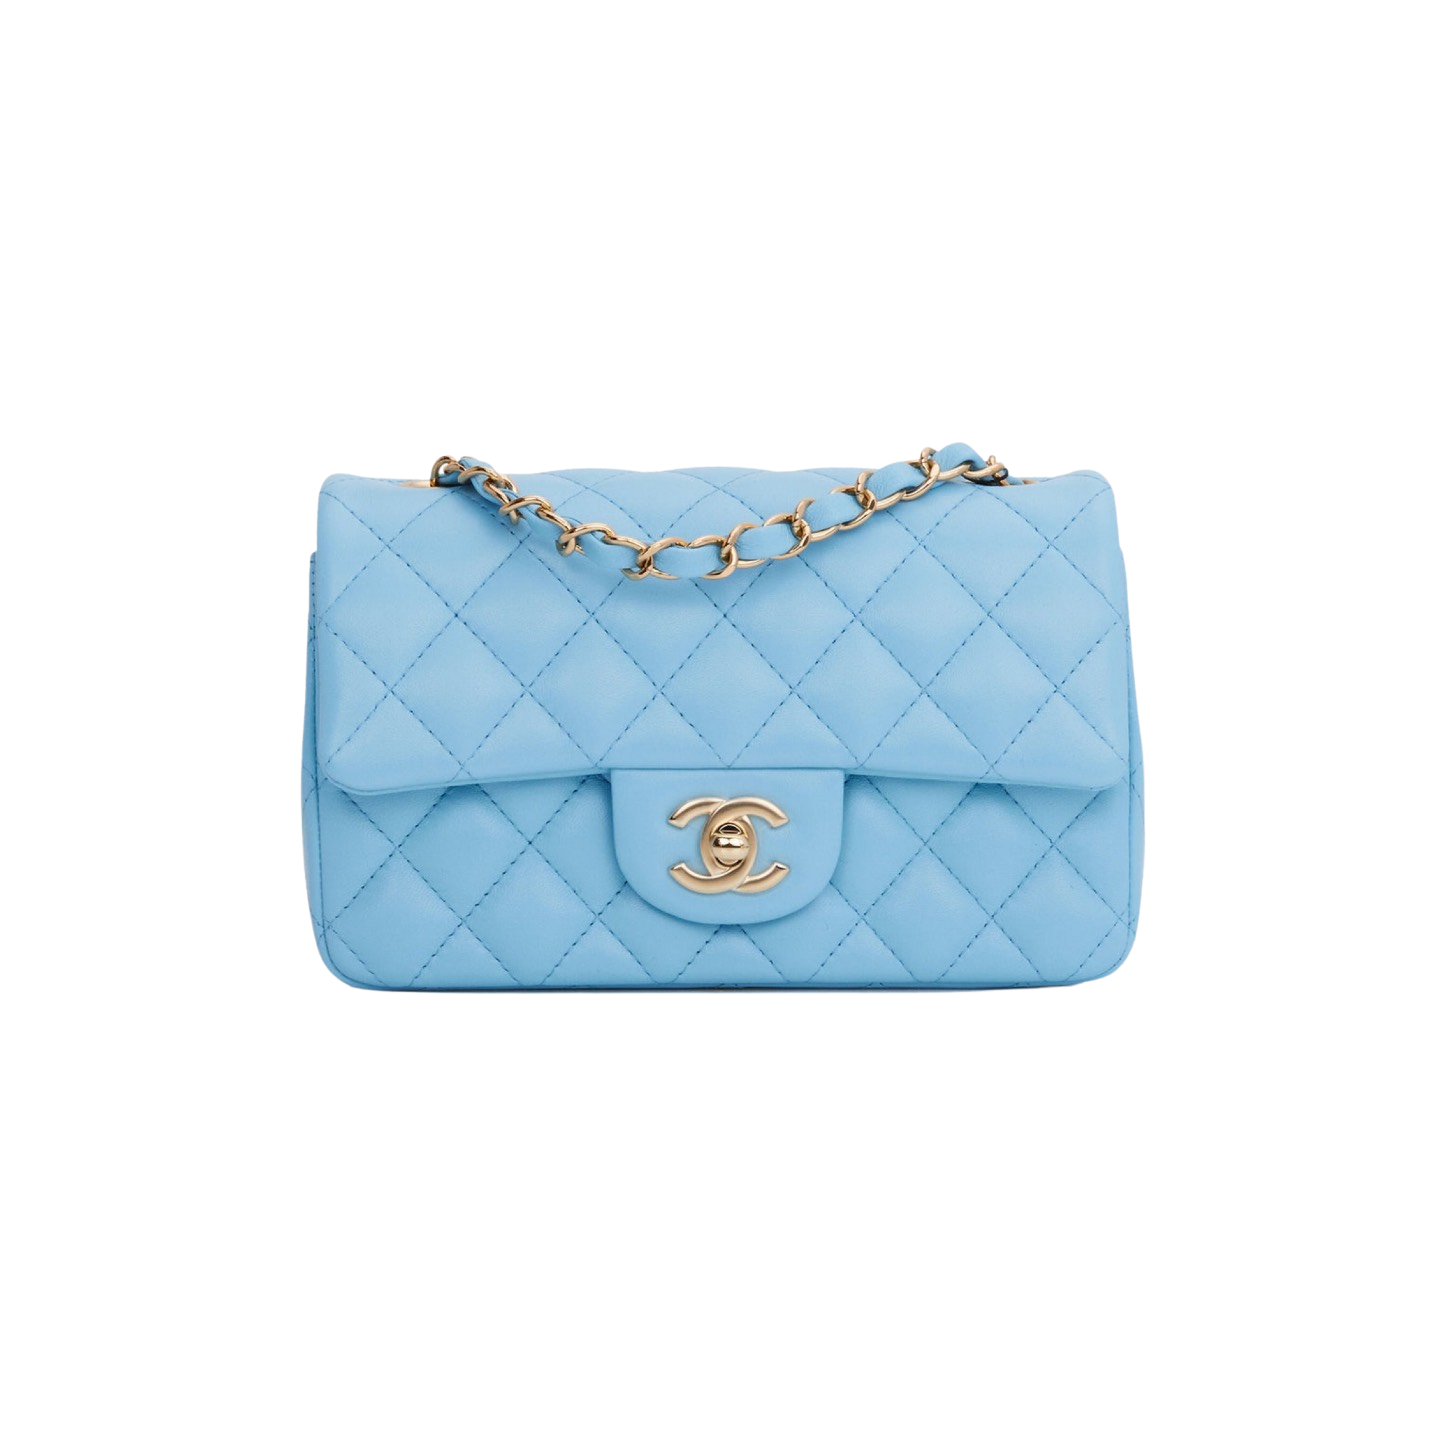 LADY C  CHANEL Classic Flap Bag Light Blue Lambskin with  Facebook